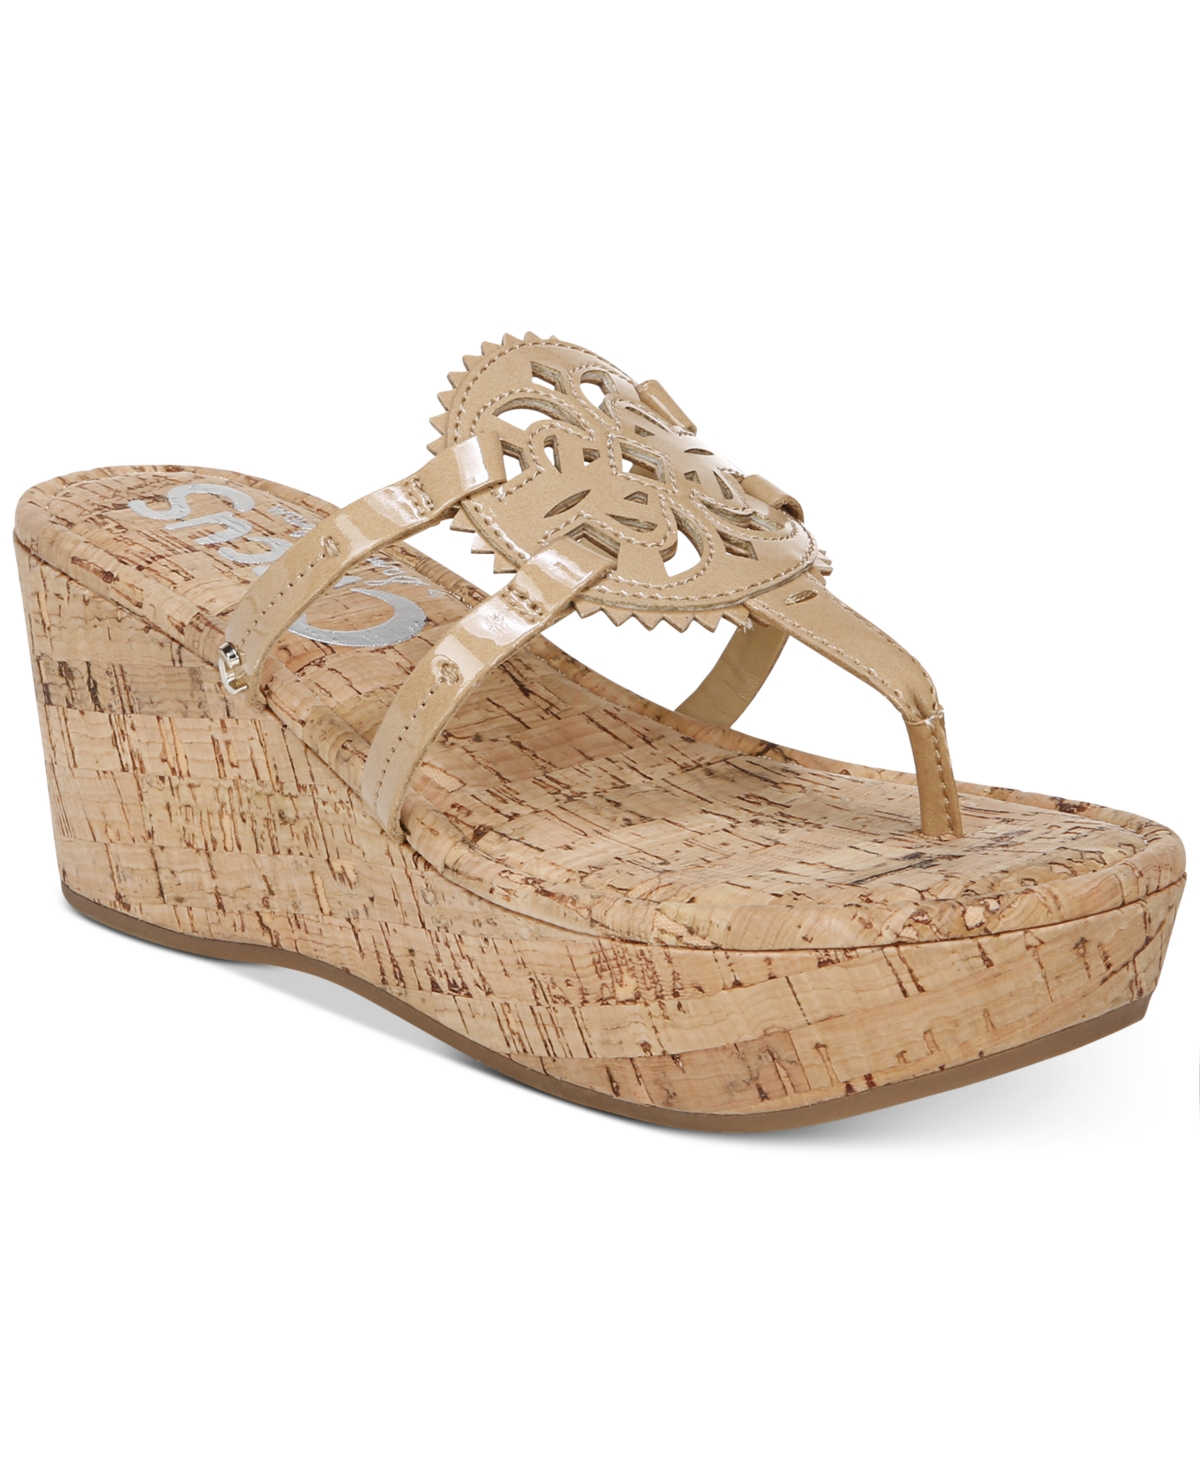 UPC 017114001373 product image for Circus by Sam Edelman Rocky Platform Wedges Women's Shoes | upcitemdb.com